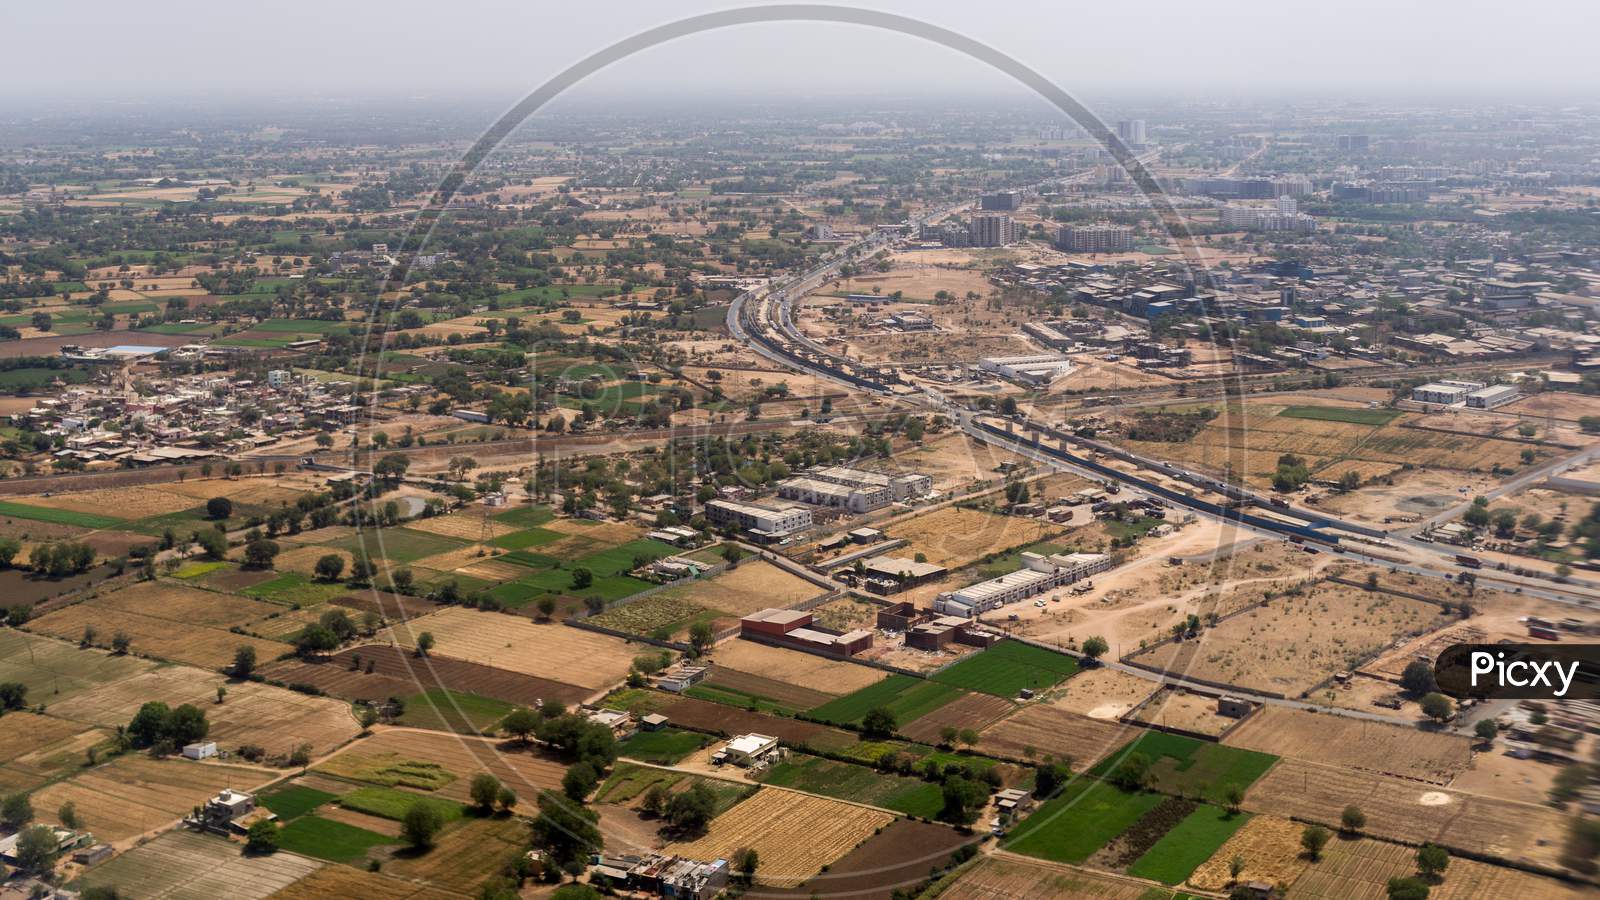 Aerial view of Ahmedabad